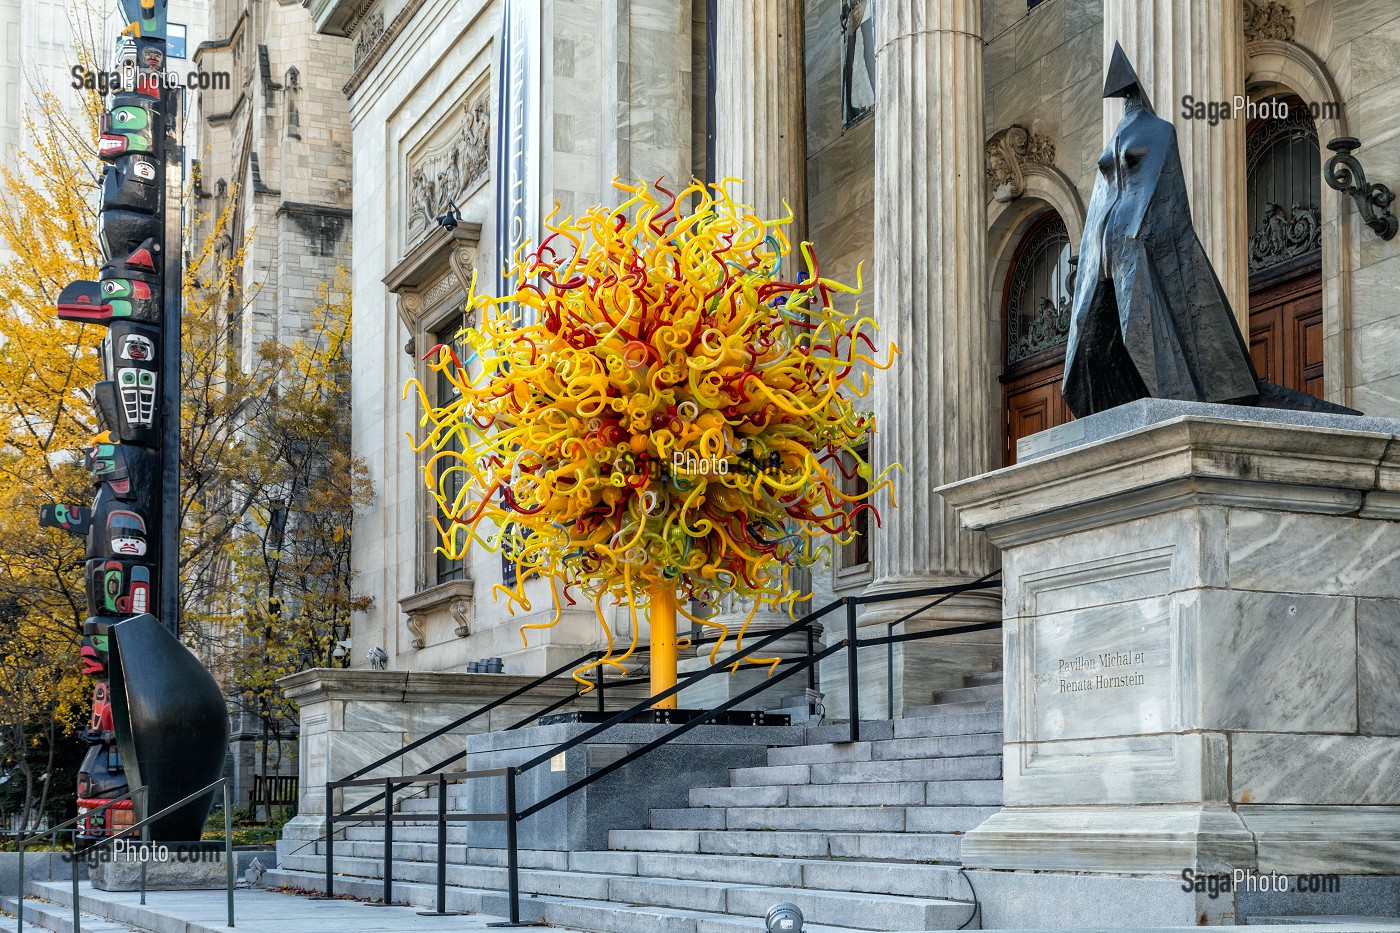 ENTREE DU MUSEE DES BEAUX-ARTS, RUE SHERBROOKE, MONTREAL, QUEBEC, CANADA 